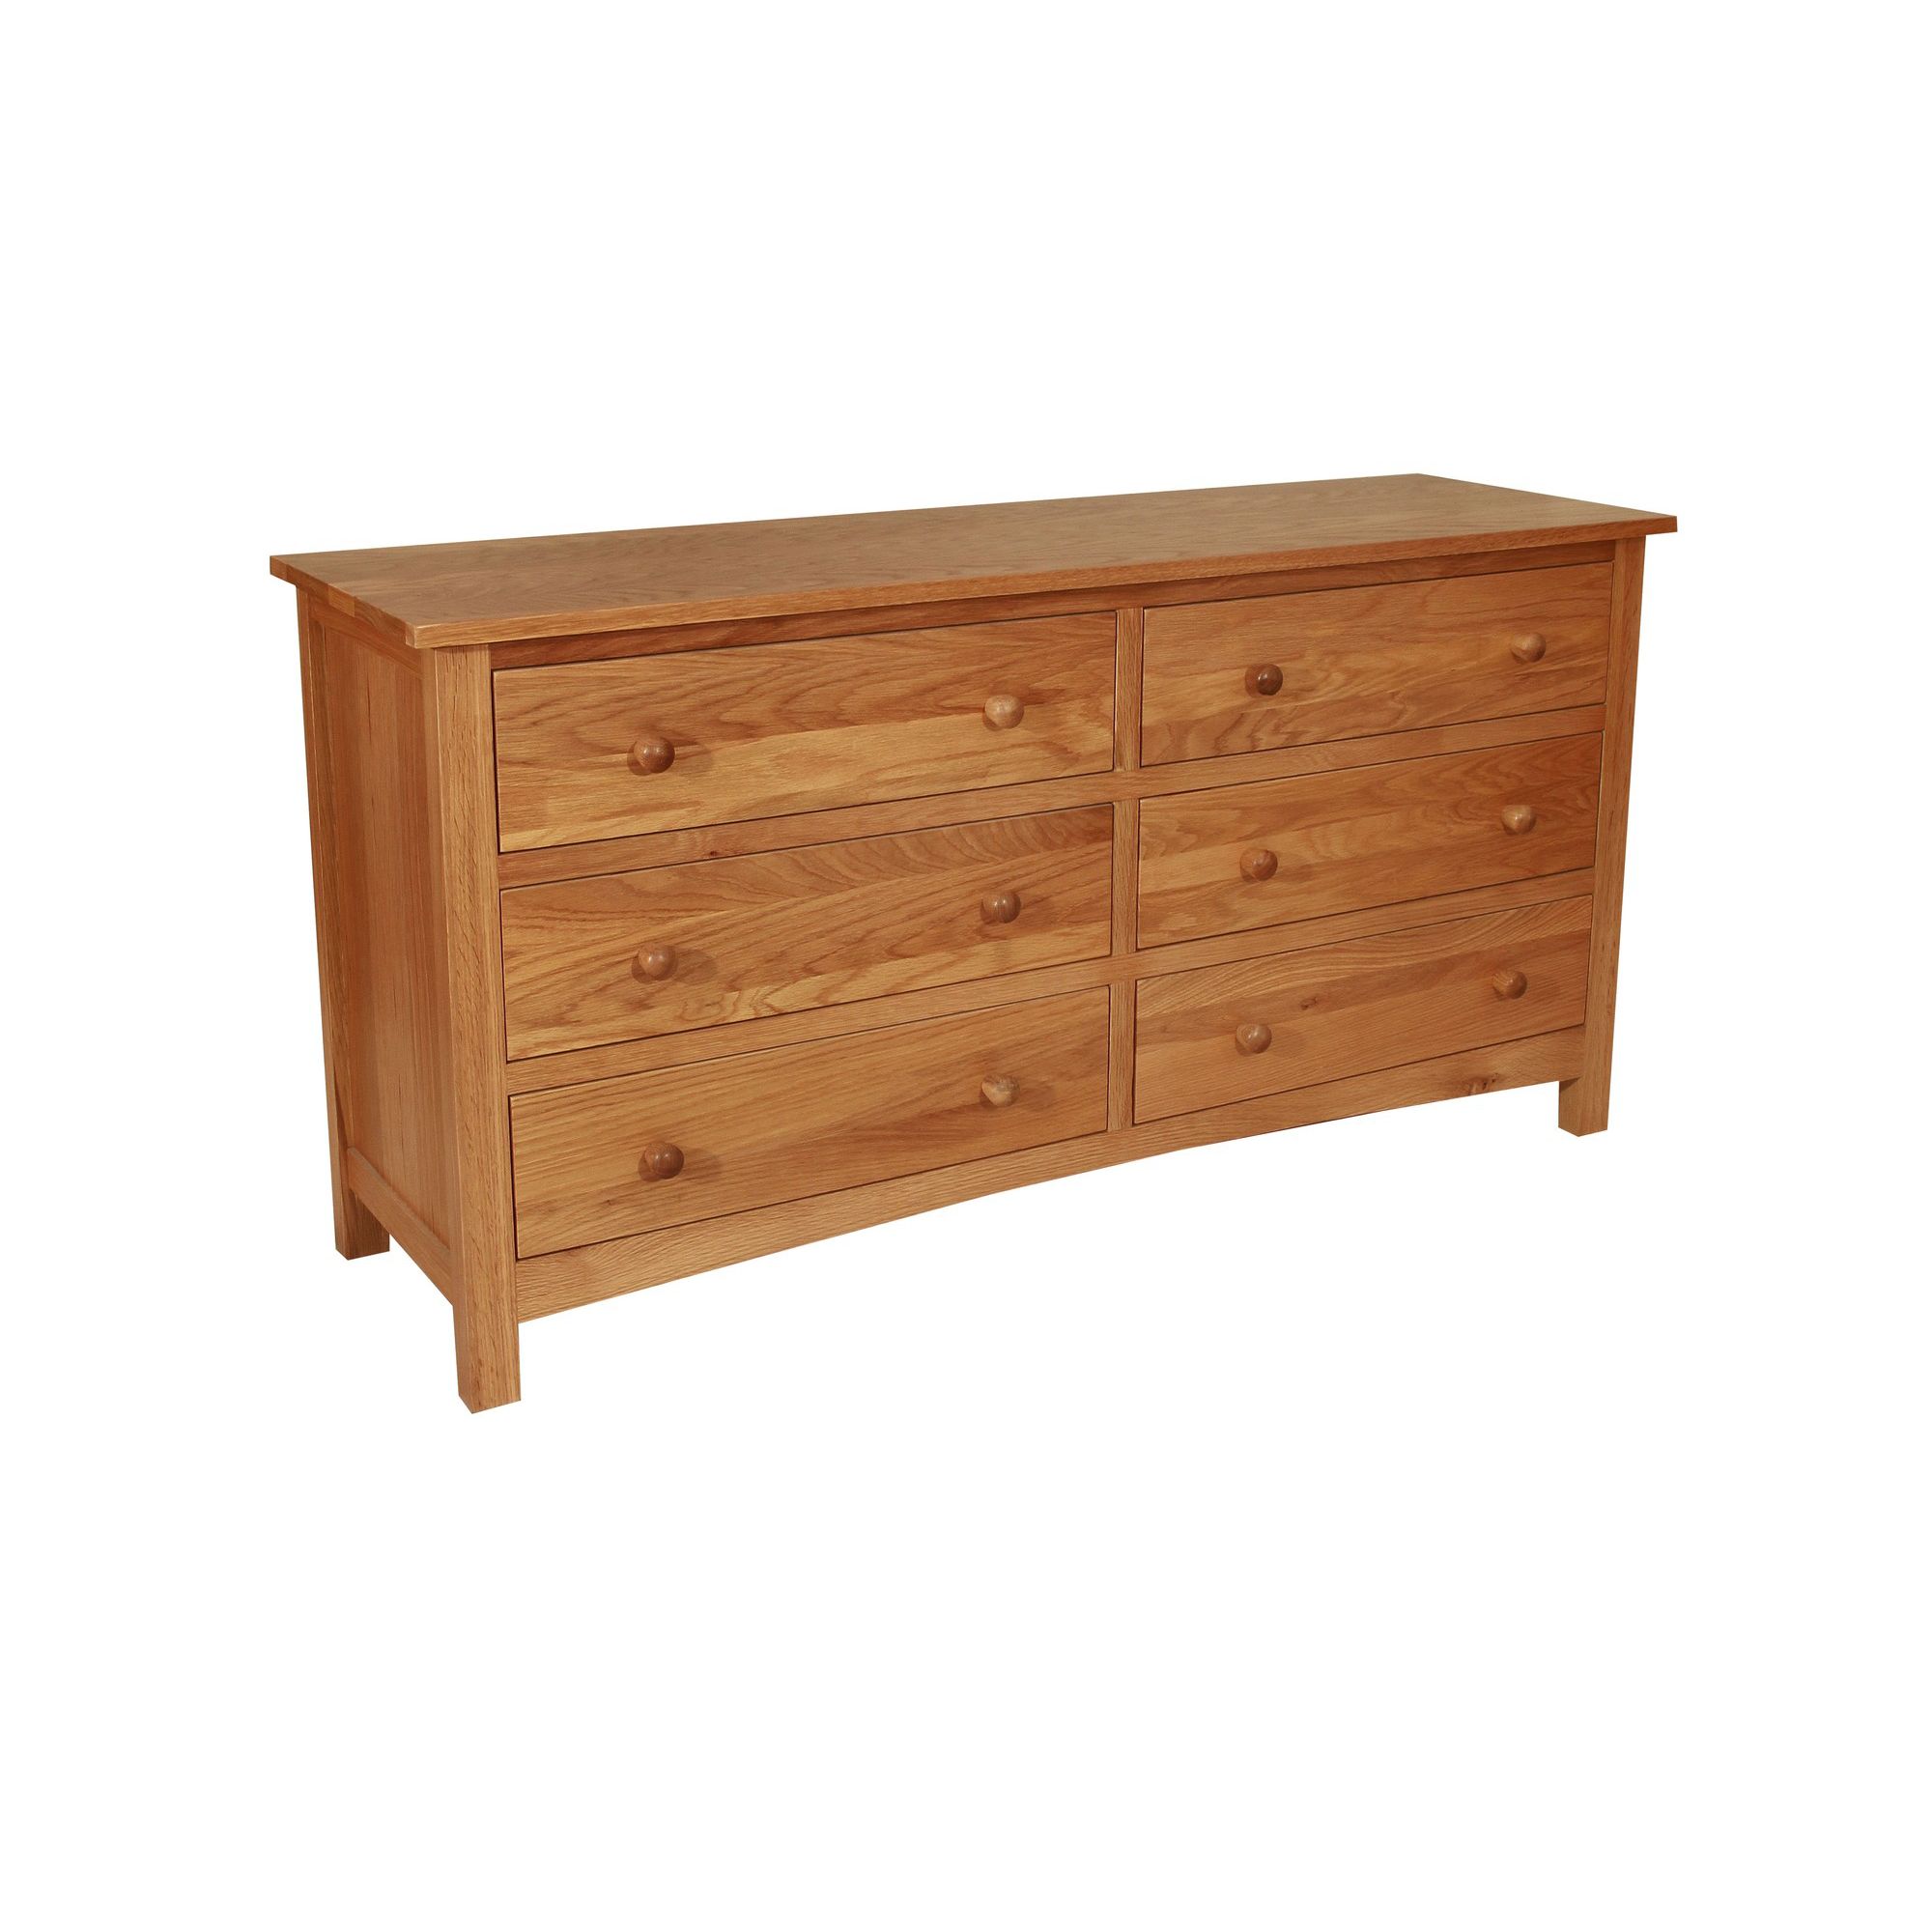 Elements Farmhouse 3 by 3 Chest of Drawers at Tesco Direct